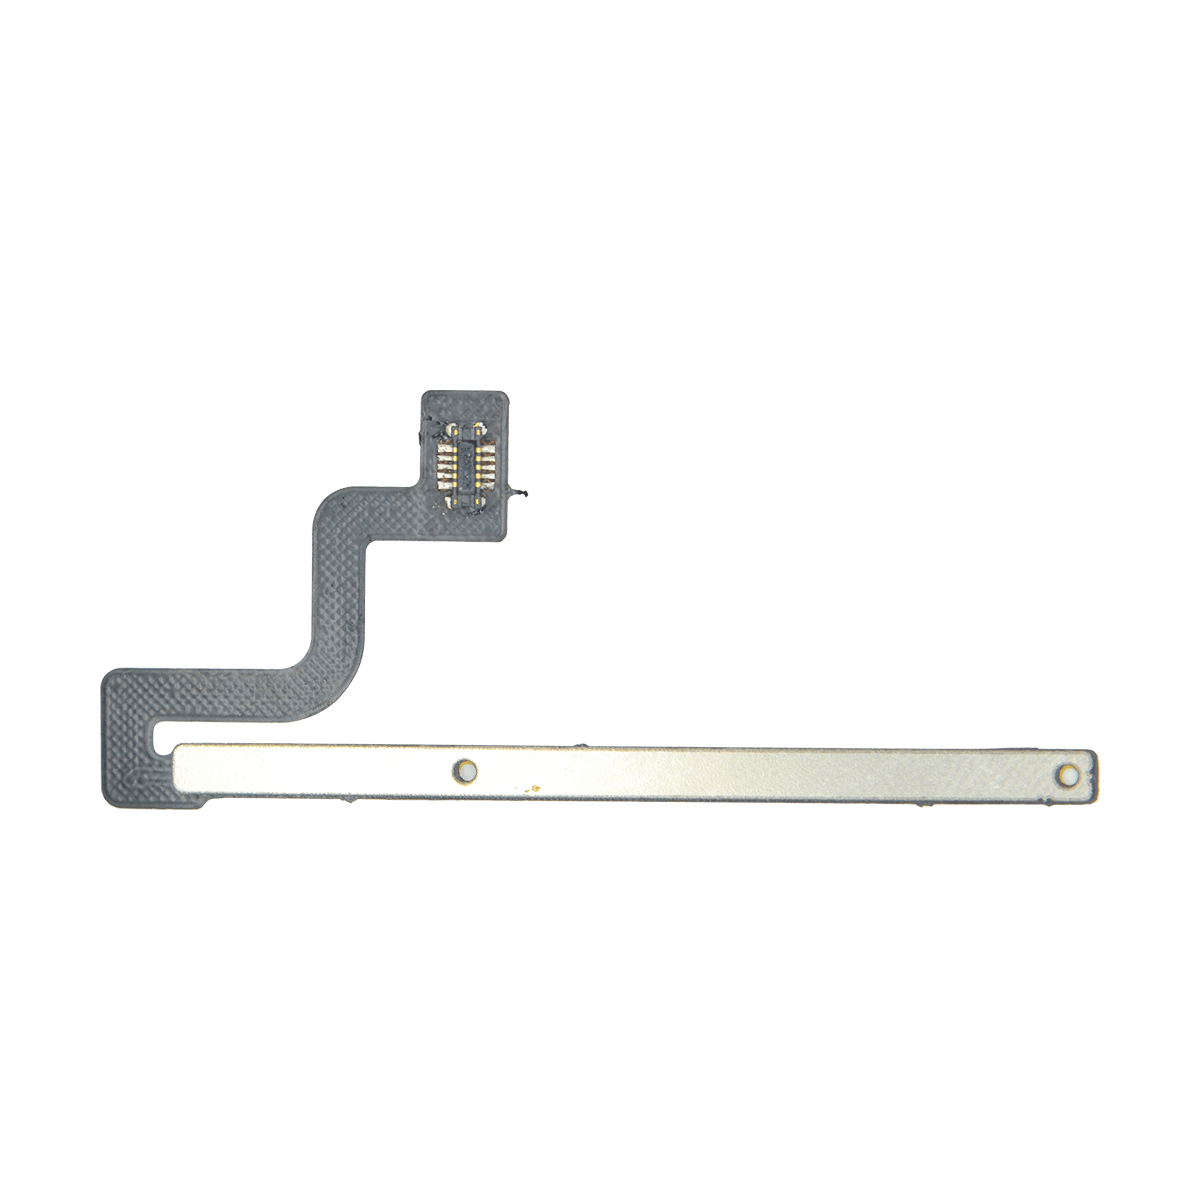 Power & Volume Buttons Flex Cable Replacement for Google Pixel XL